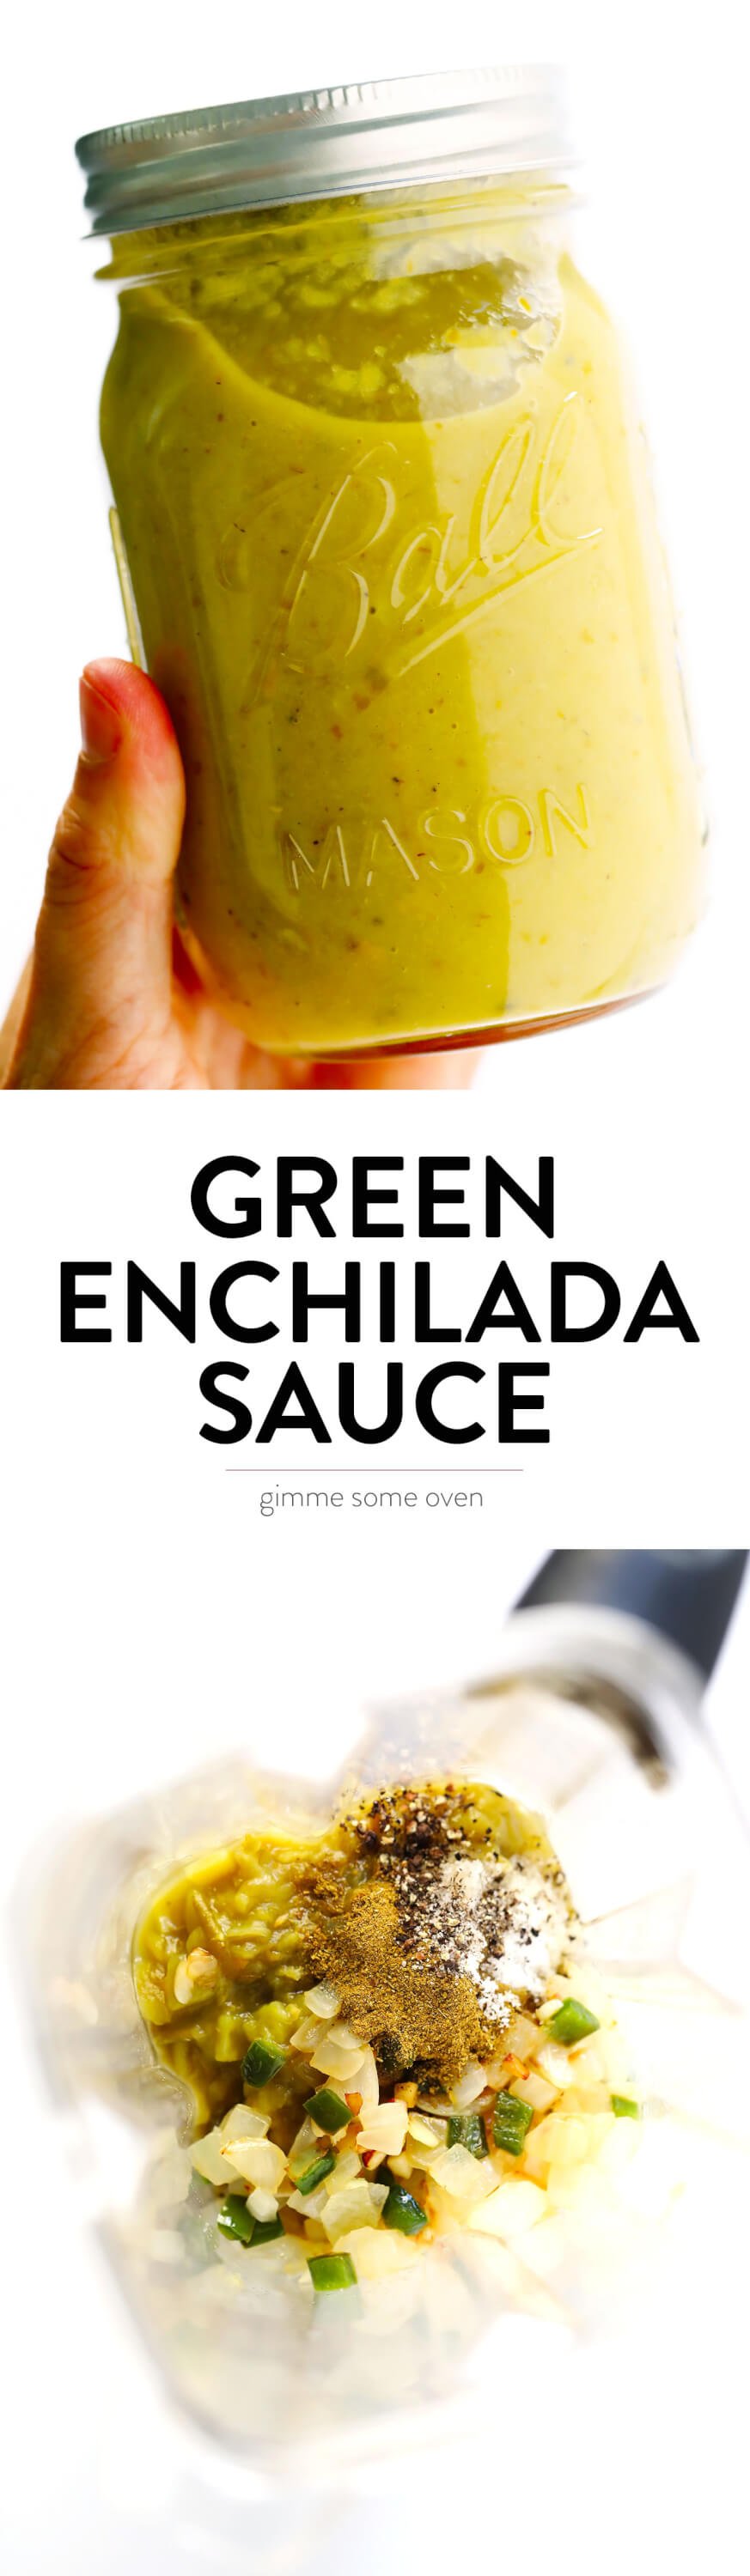 15-Minute Green Enchilada Sauce Recipe from Gimme Some Oven